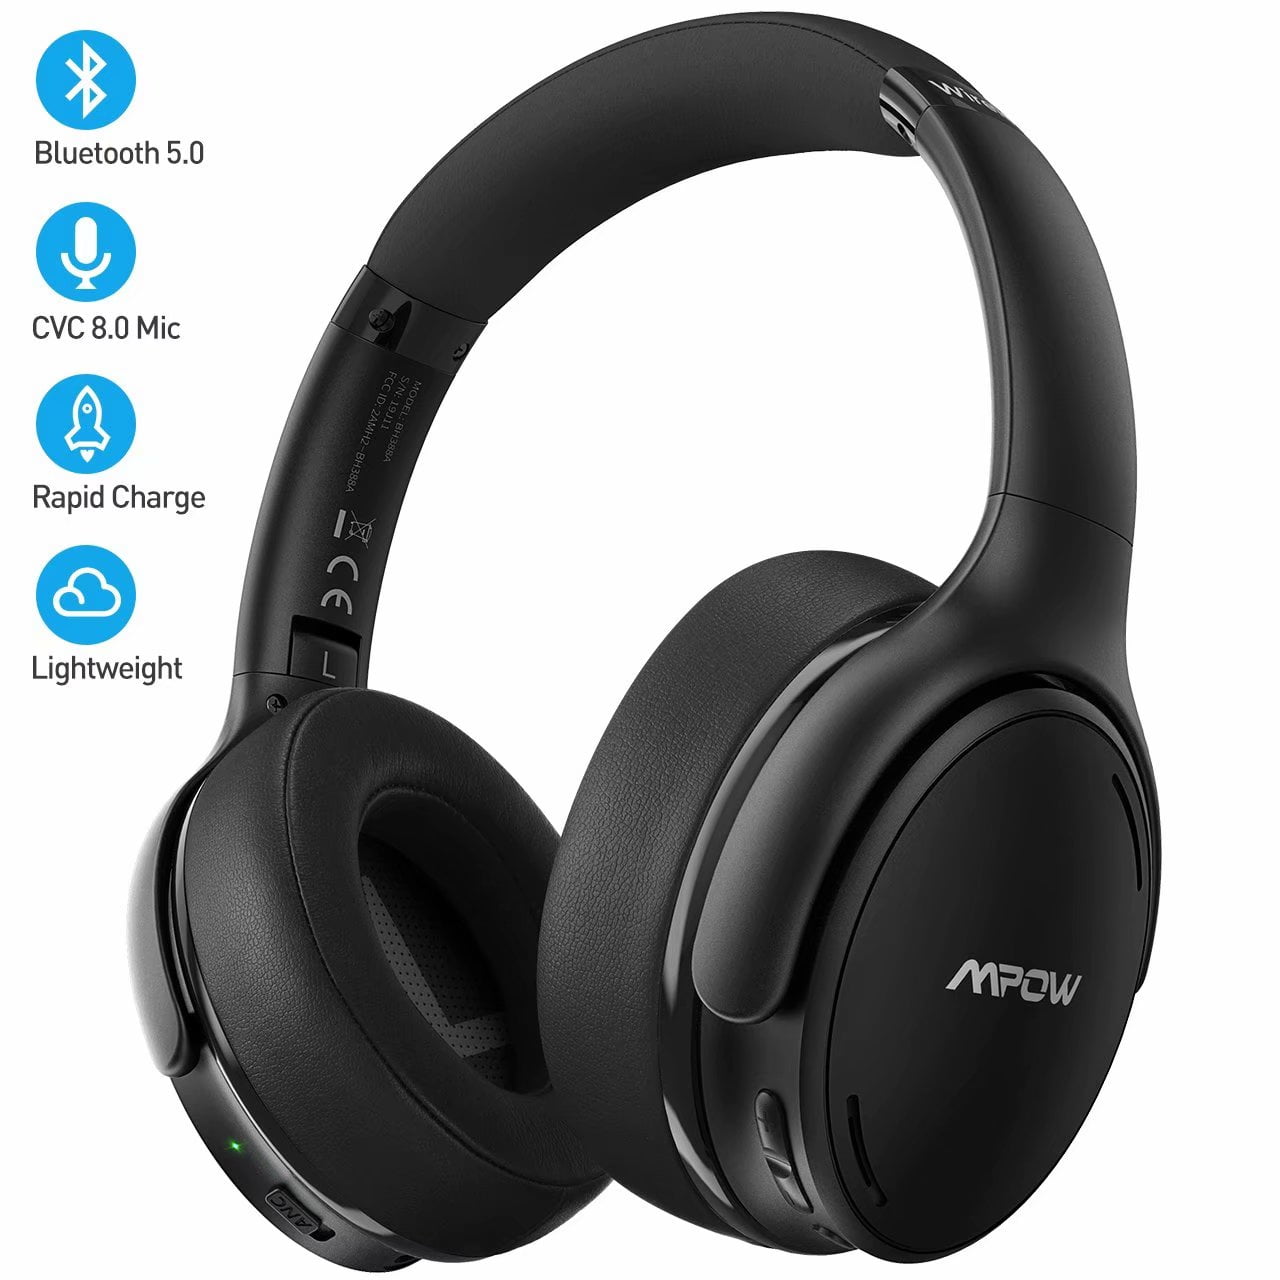 Mpow H12 IPO BH427 Bluetooth HiFi Stereo Headphones Noise Cancelling -  Black